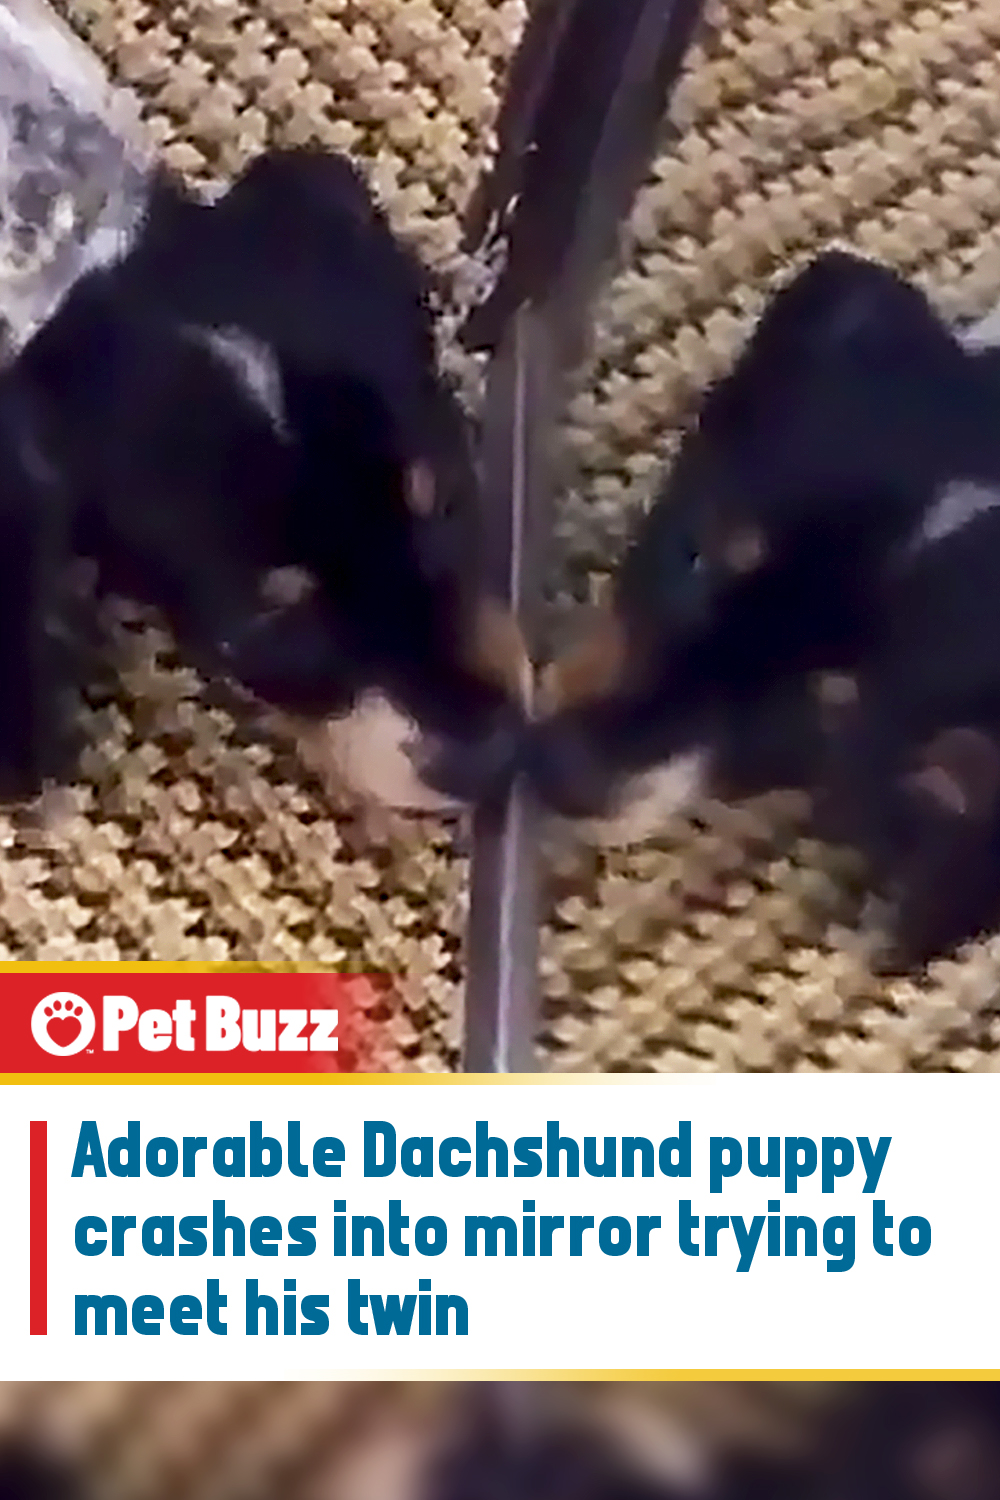 Adorable Dachshund puppy crashes into mirror trying to meet his twin